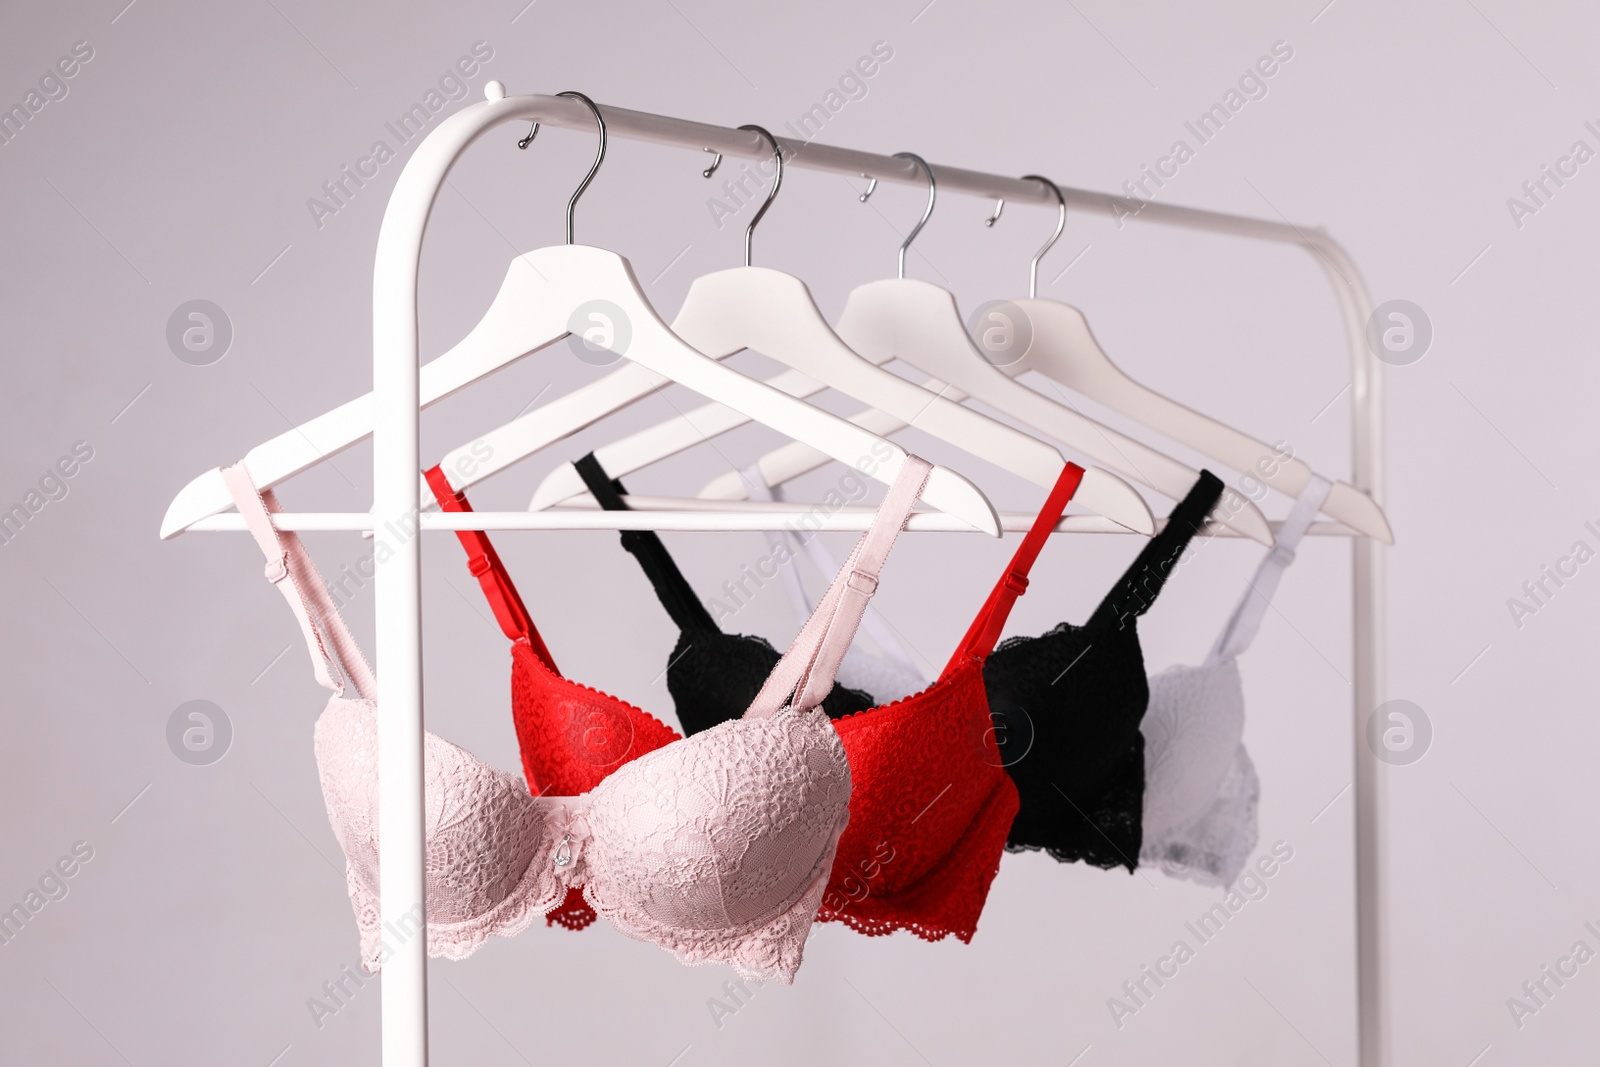 Photo of Hangers with beautiful lace bras on rack against grey background. Stylish underwear